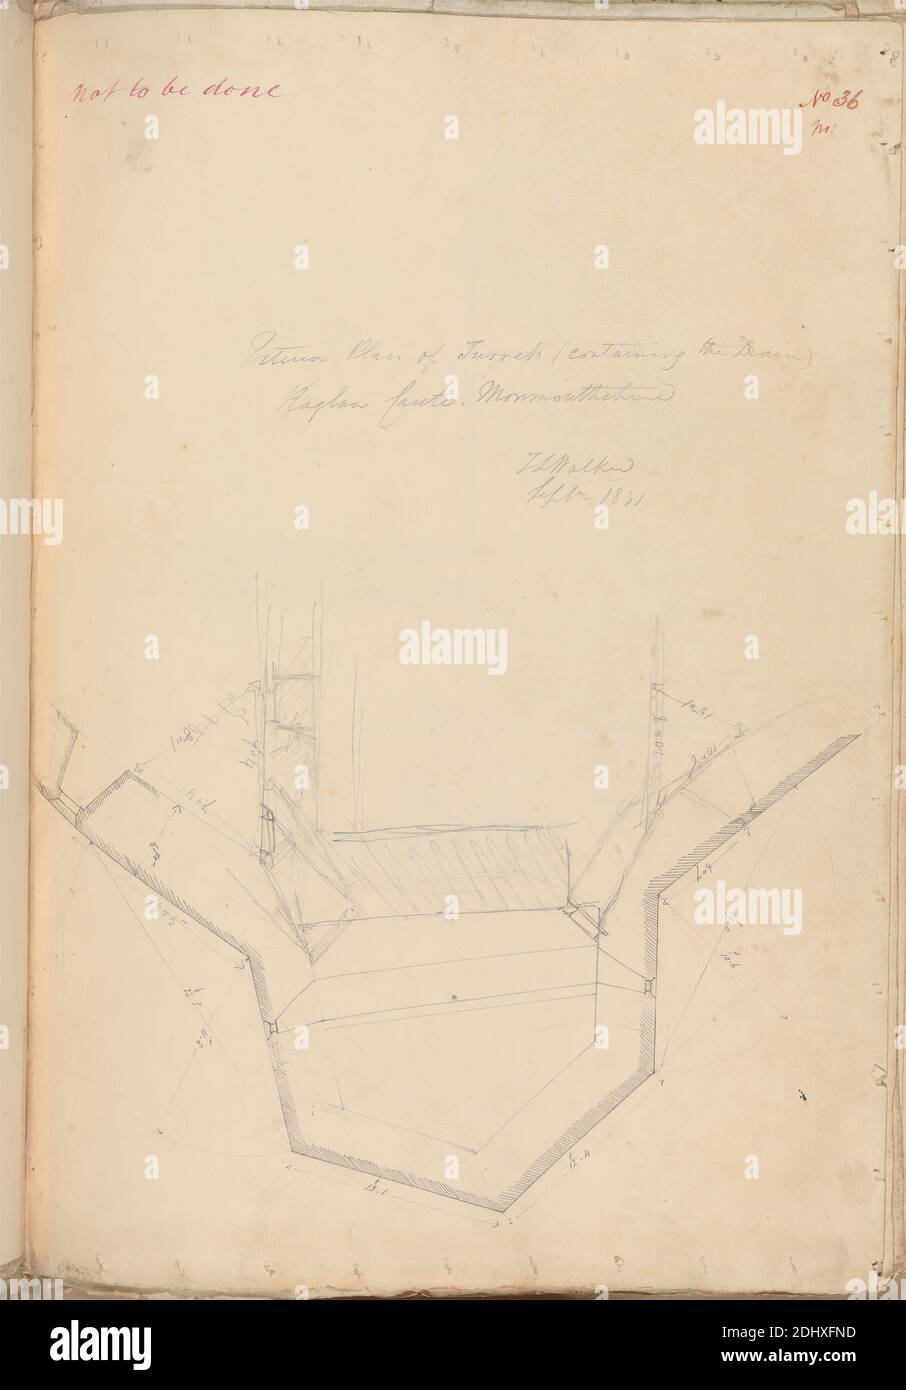 Raglan Castle, Monmouthshire, Wales: Plan of Turret, unknown artist, (TL Walker), Studio of Augustus Charles Pugin, 1762–1832, French, formerly Augustus Welby Northmore Pugin, 1812–1852, British, 1831, Graphite and pen and pink ink on moderately thick, smooth, cream wove paper, Sheet: 15 1/8 x 10 5/8 inches (38.4 x 27 cm), architectural subject, castle, drains, exterior, Gothic (Medieval), plans (drawings), turrets (towers), Monmouthshire, Raglan Castle Stock Photo